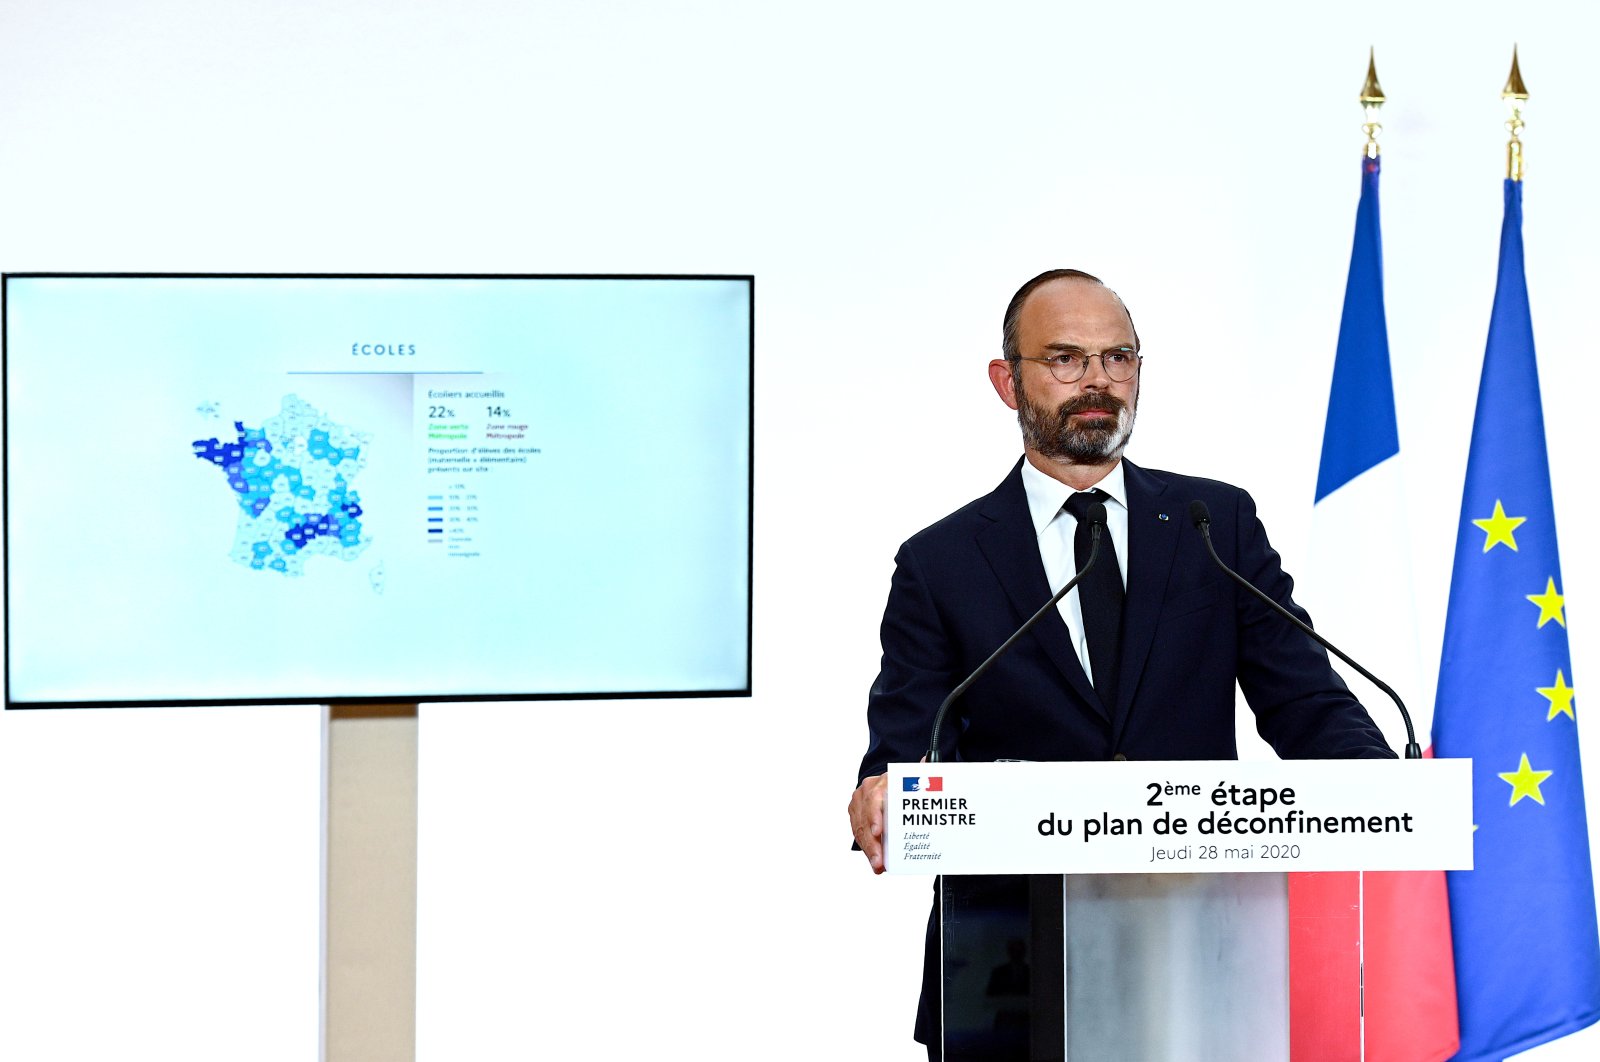 French Prime Minister Edouard Philippe attends a televised address to announce the second phase of the easing of lockdown measures amid the spread of the coronavirus disease (COVID-19) from June 2, at the Hotel Matignon in Paris, France May 28, 2020. (REUTERS Photo)